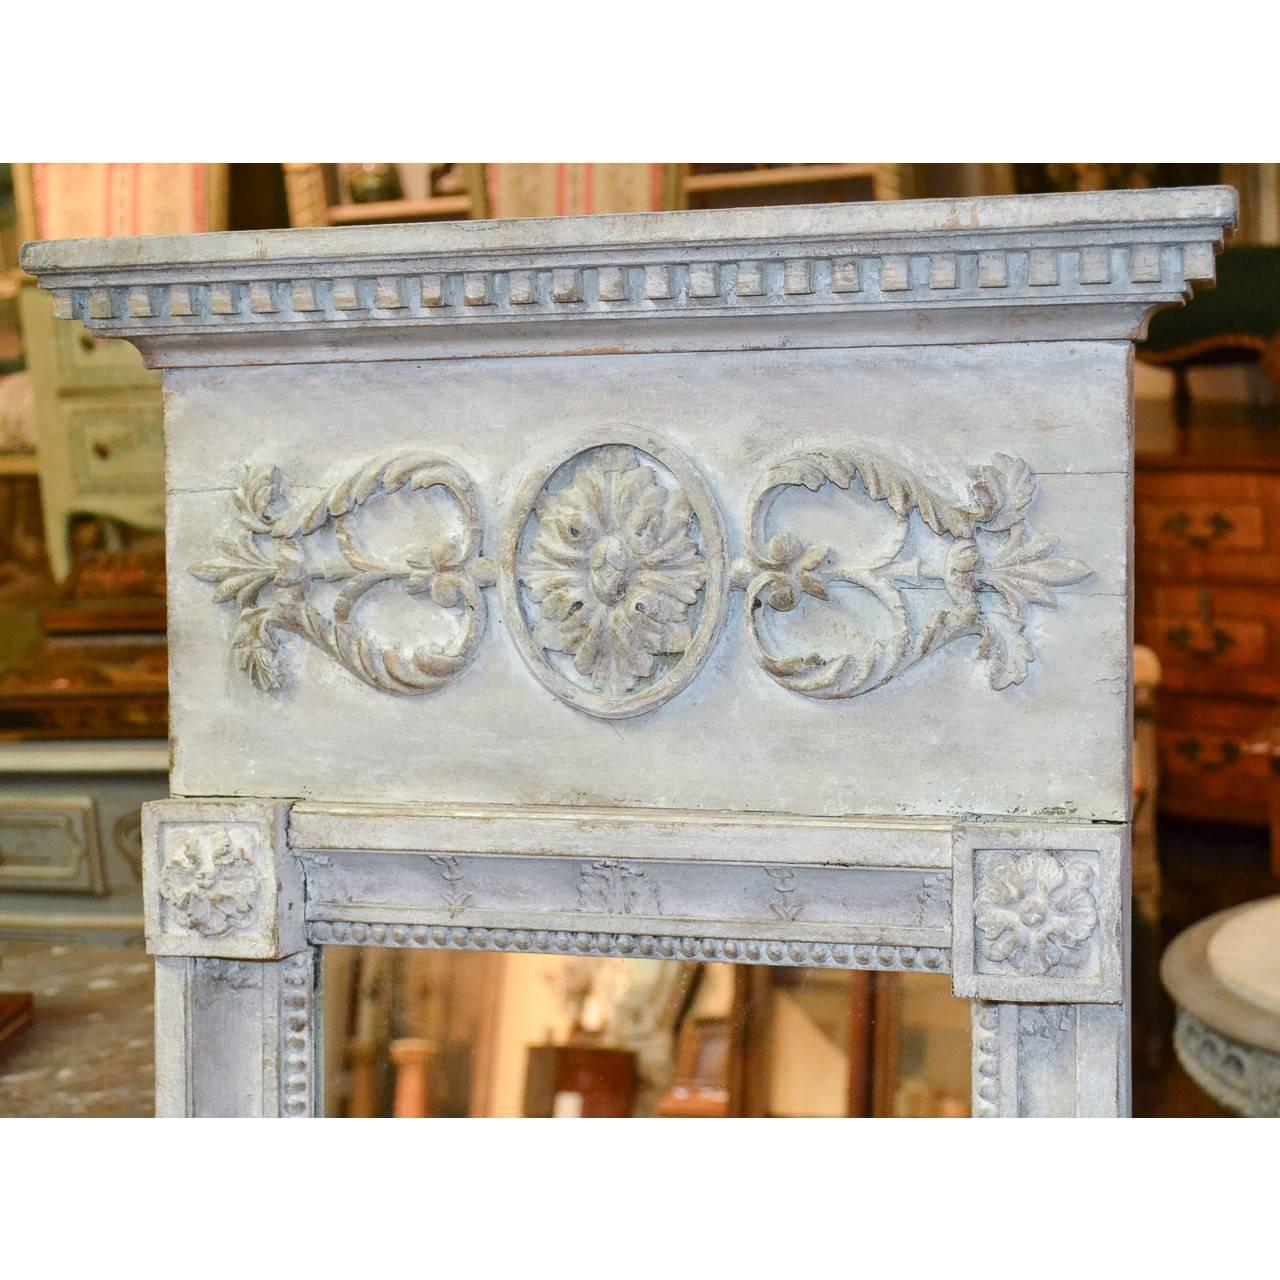 Beautiful 19th century French white washed Napoleon III mirror.
Measure: 60 inches height x 19 inches wide x 2.5 inches deep.